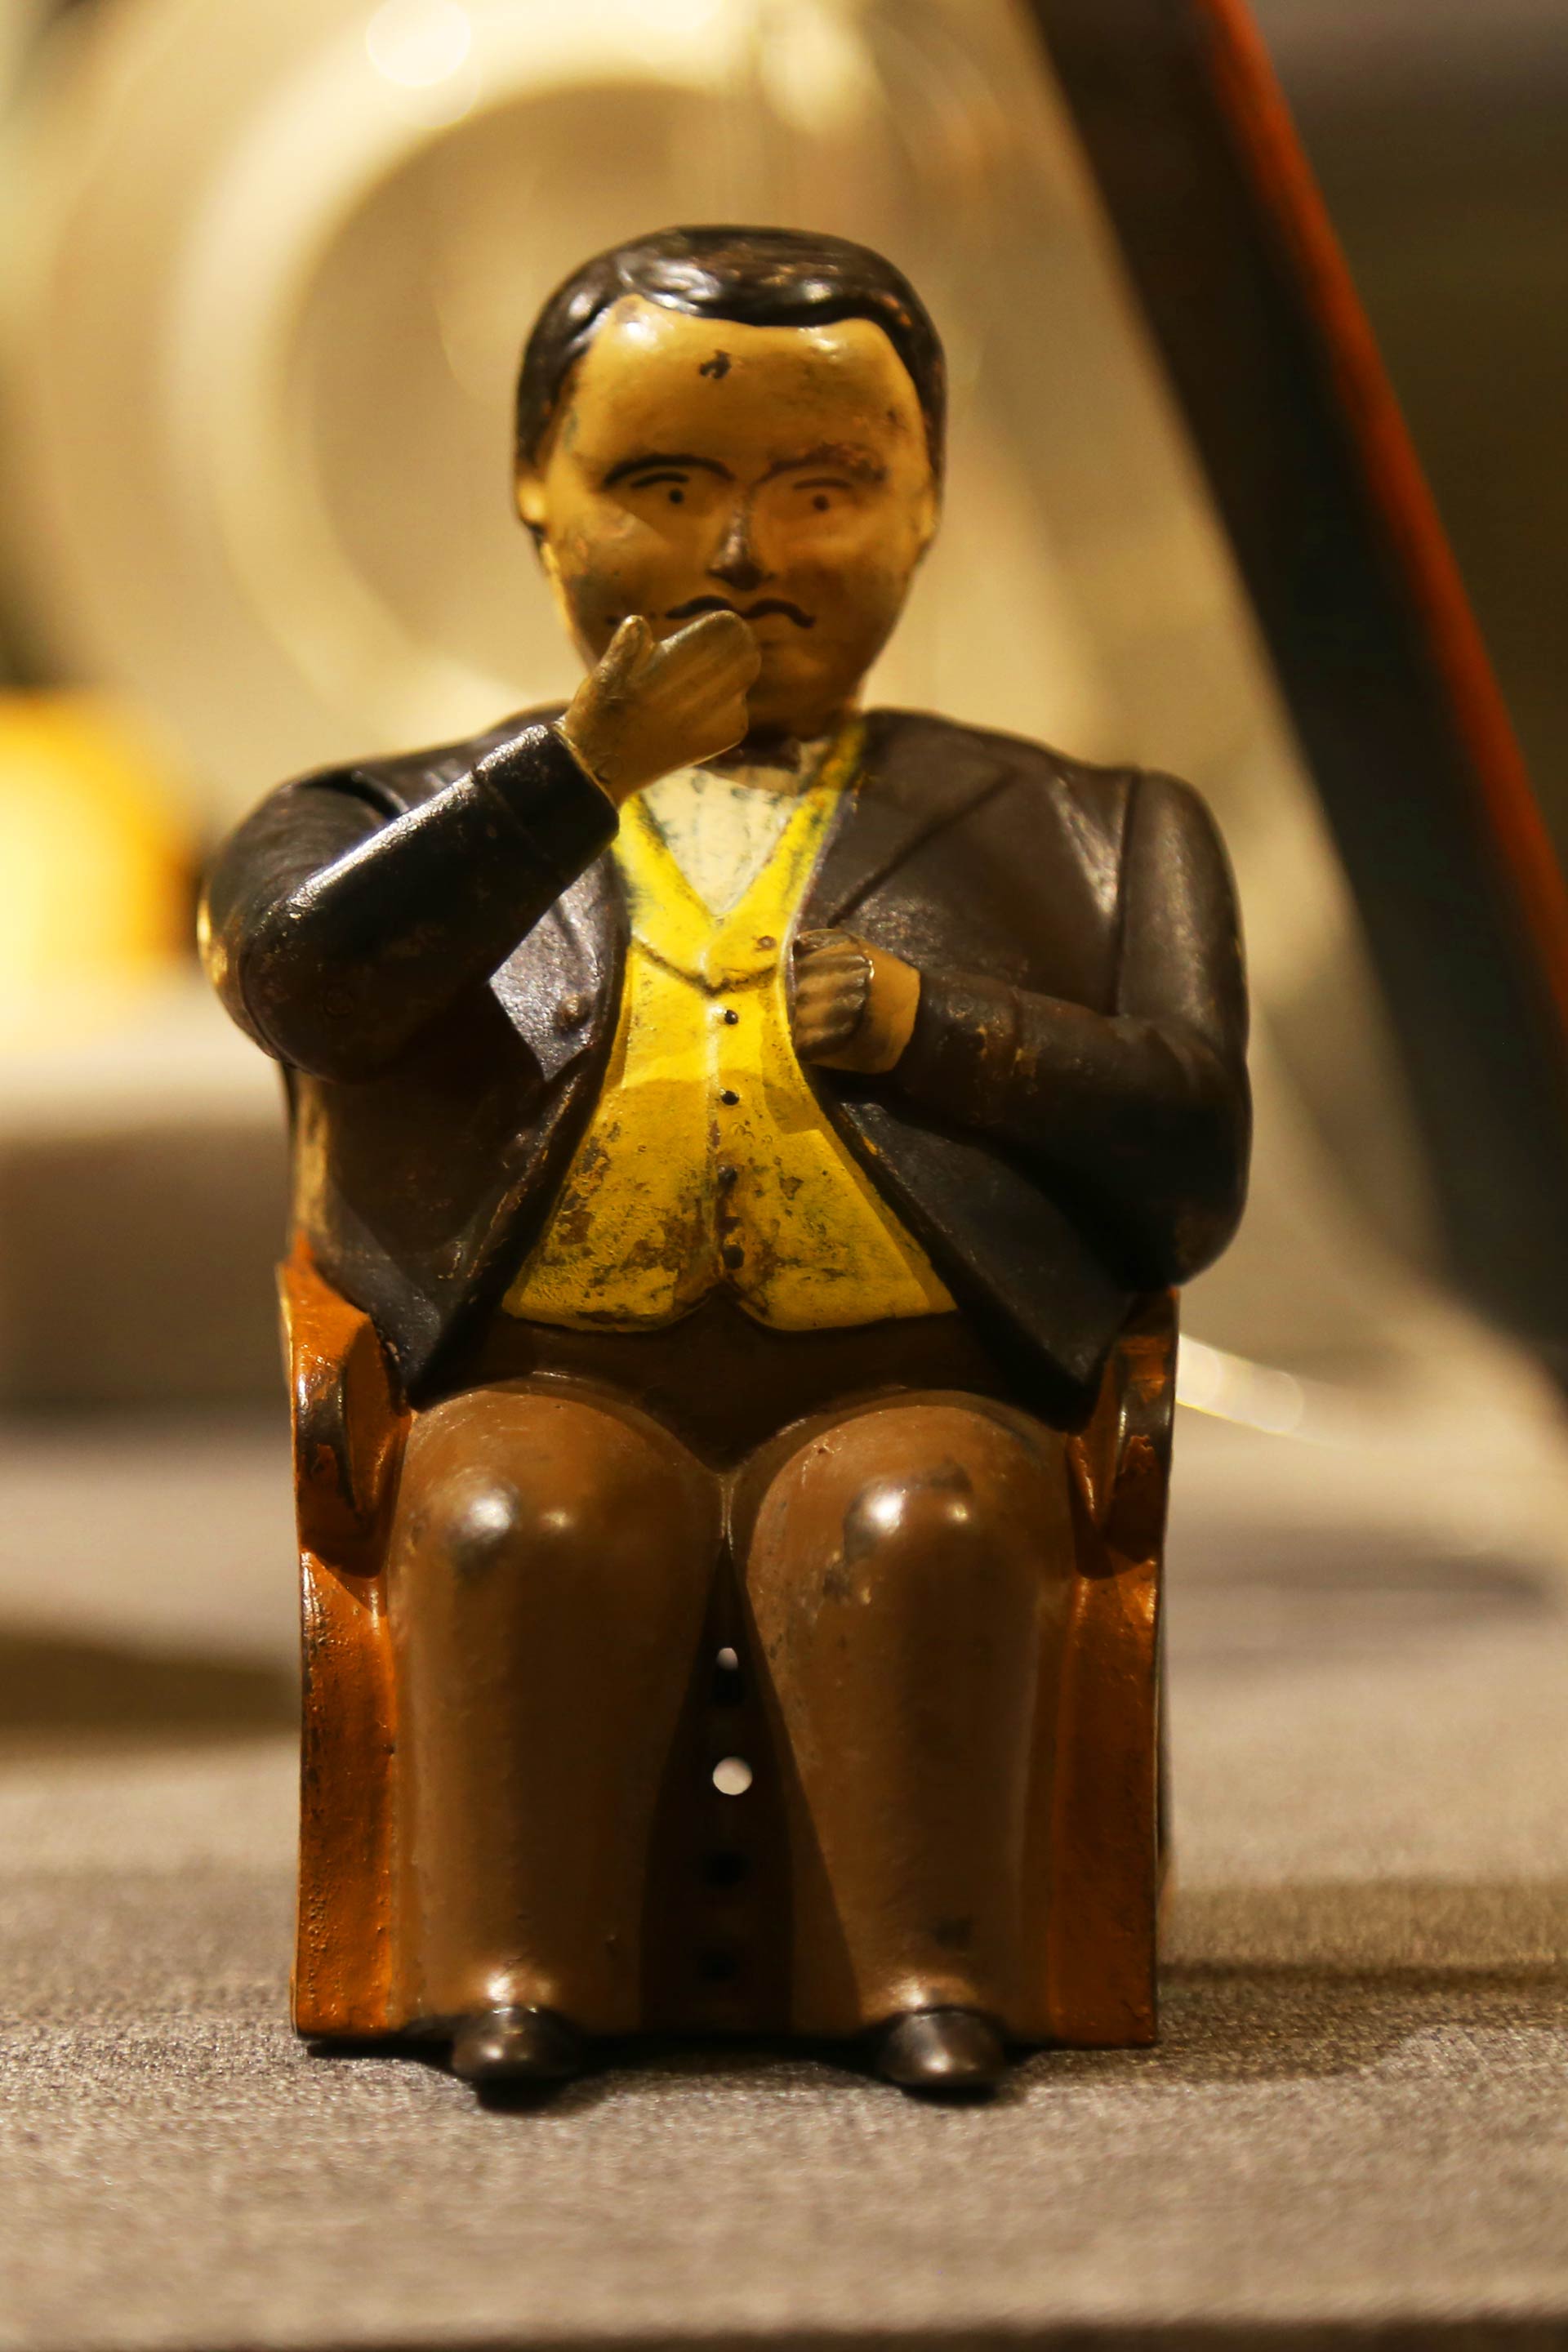 image of a wooden carving of a person sitting on a chair